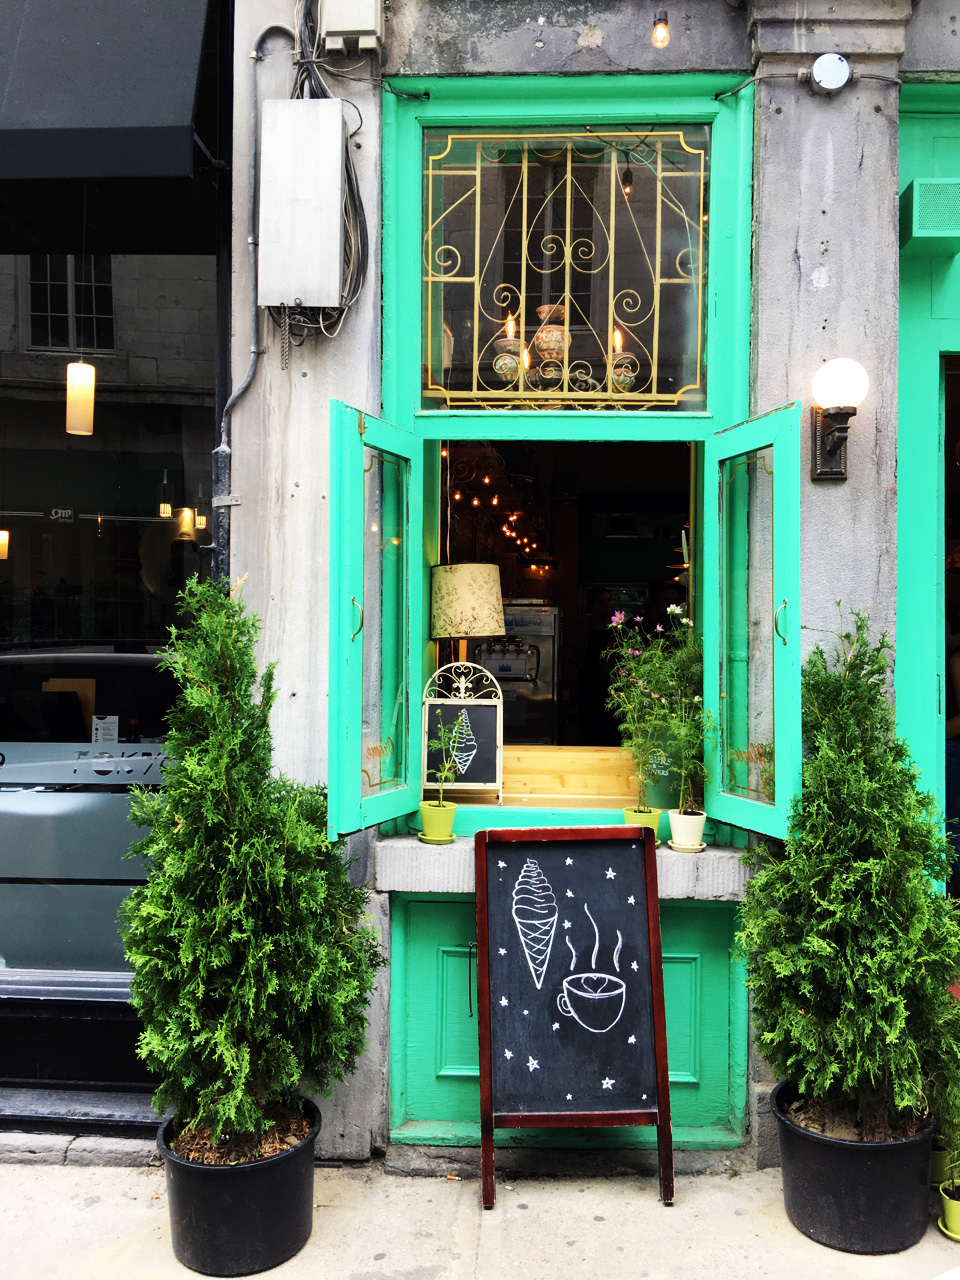 CafÃ©s on rue Saint-Paul - Things to Do in Montreal